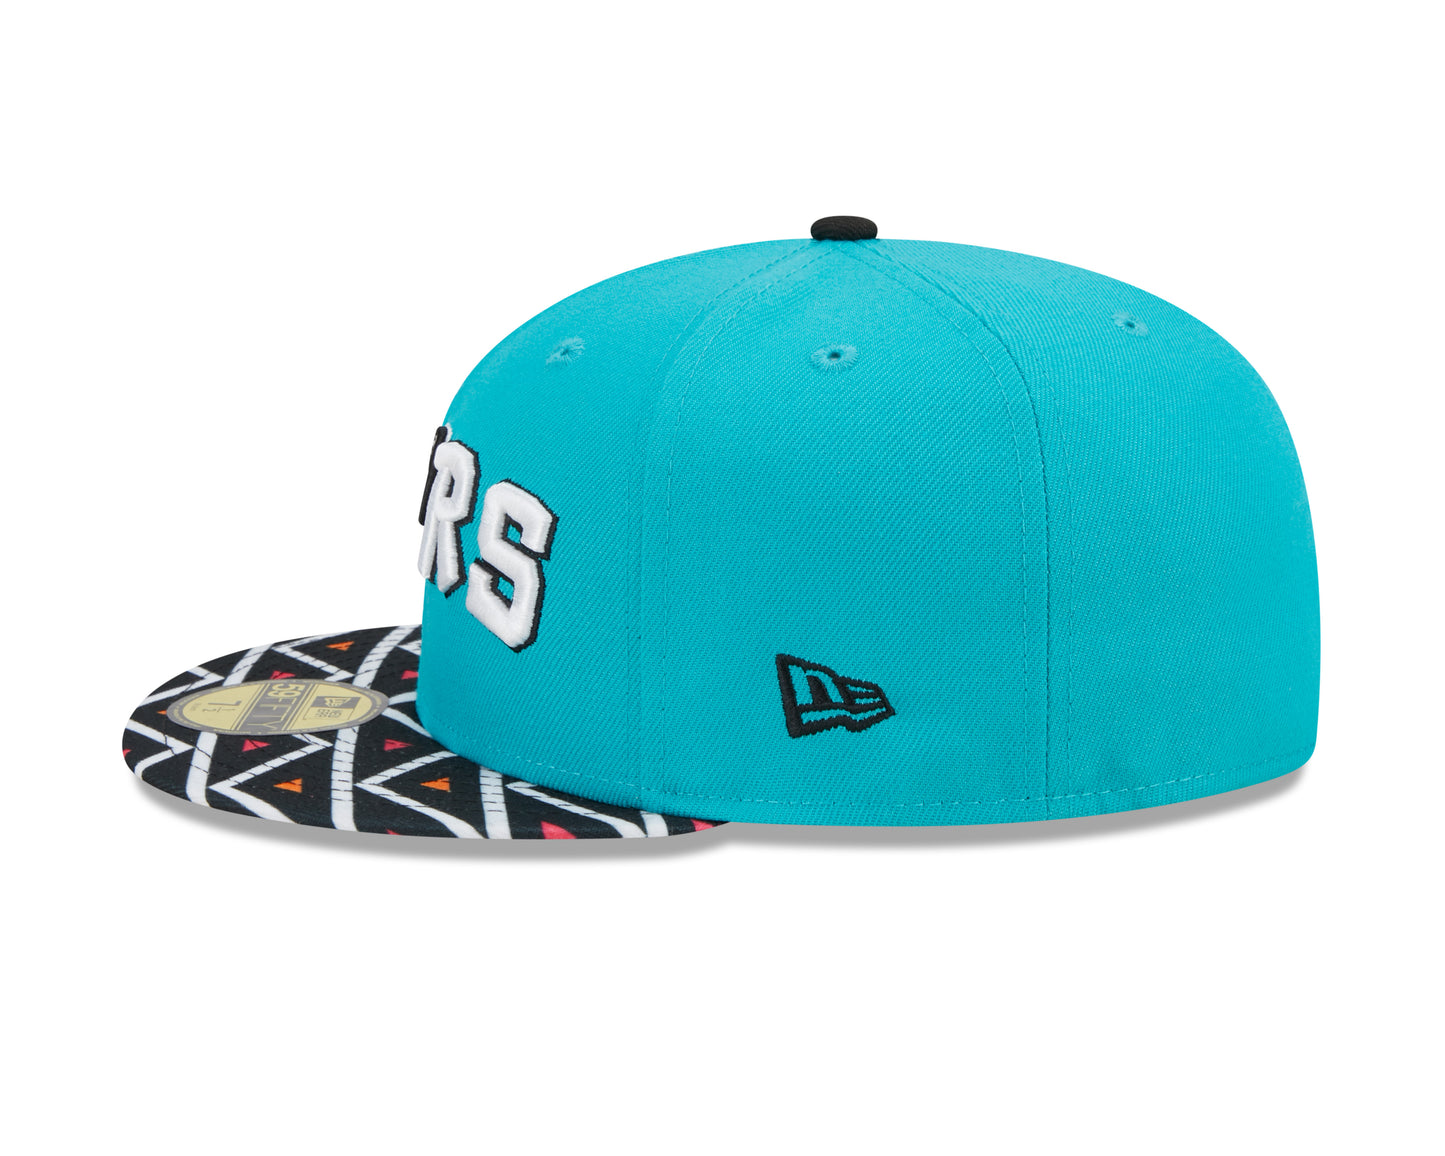 San Antonio Spurs New Era City Edition 59FIFTY Fitted Hat - Blue